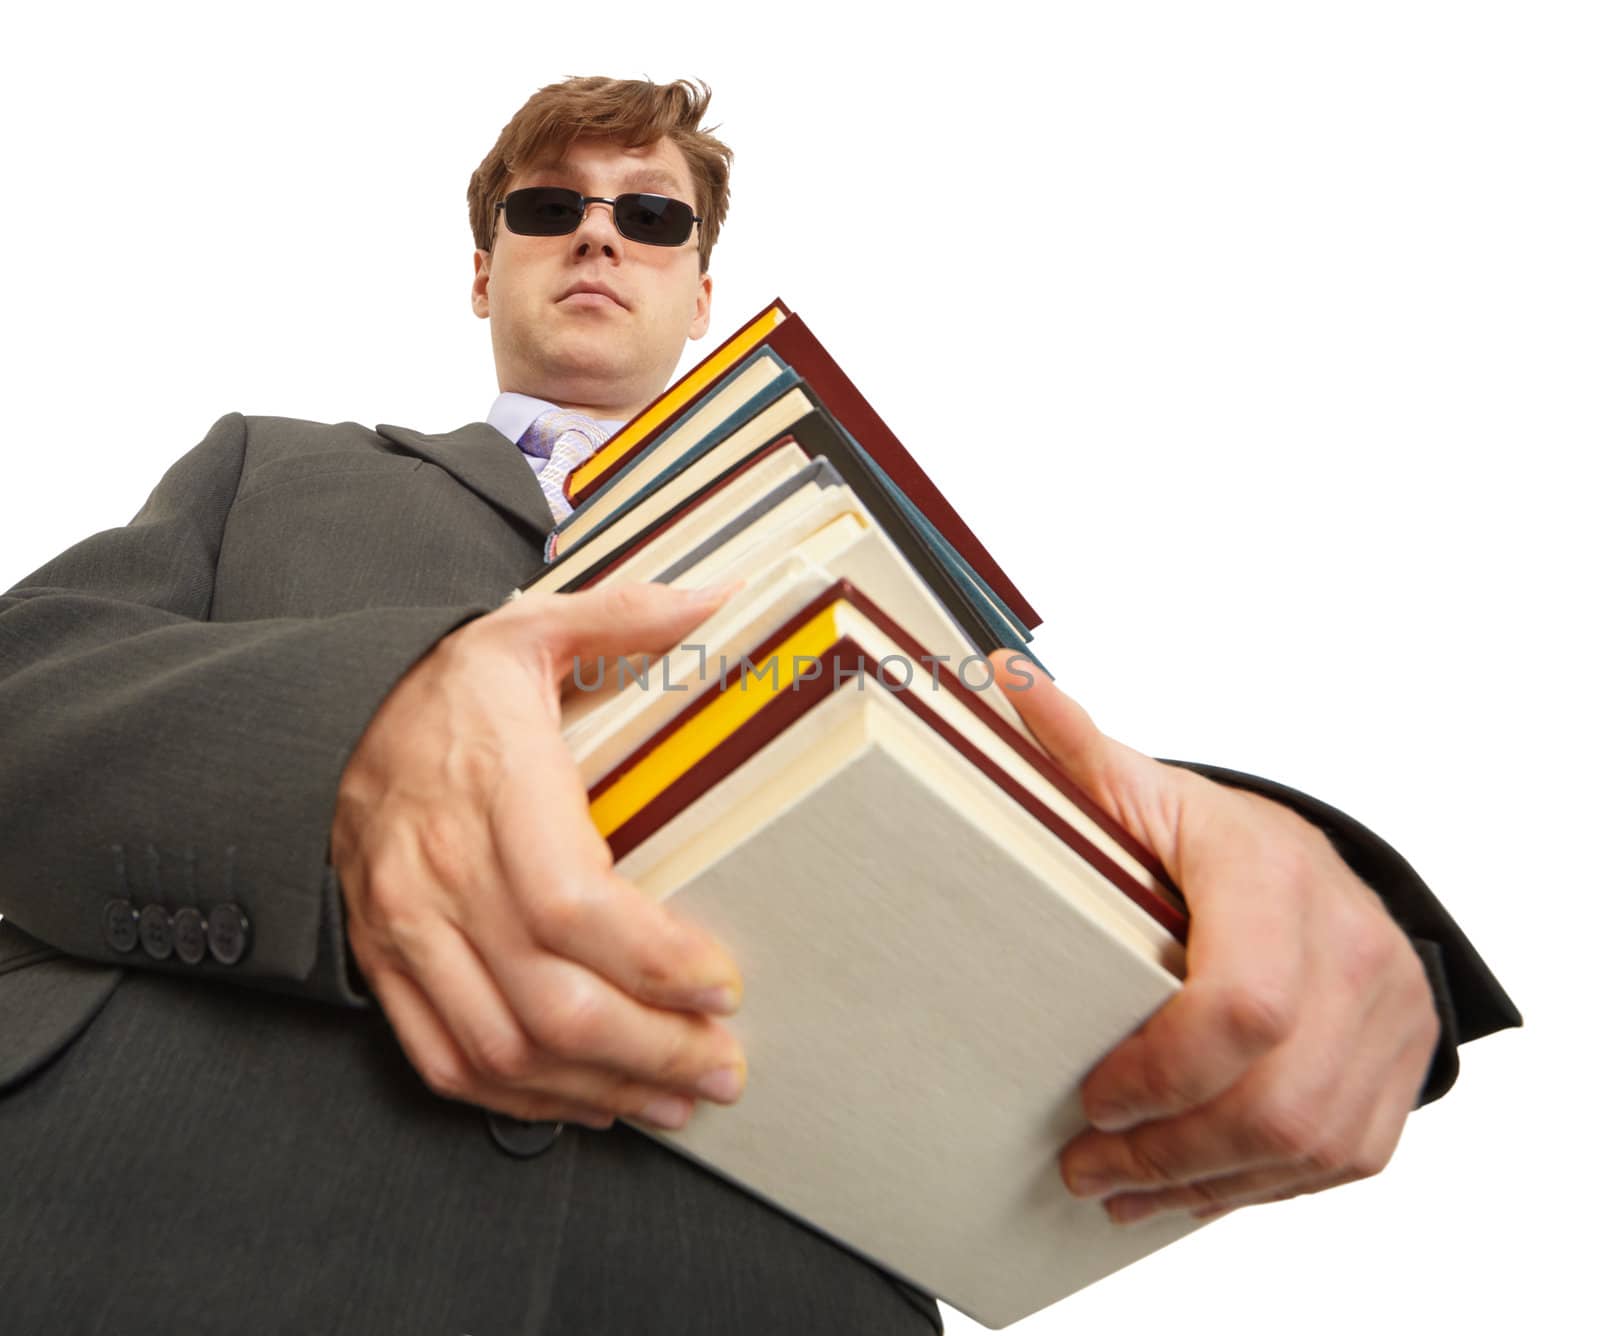 A man in dark glasses holding a lot of books